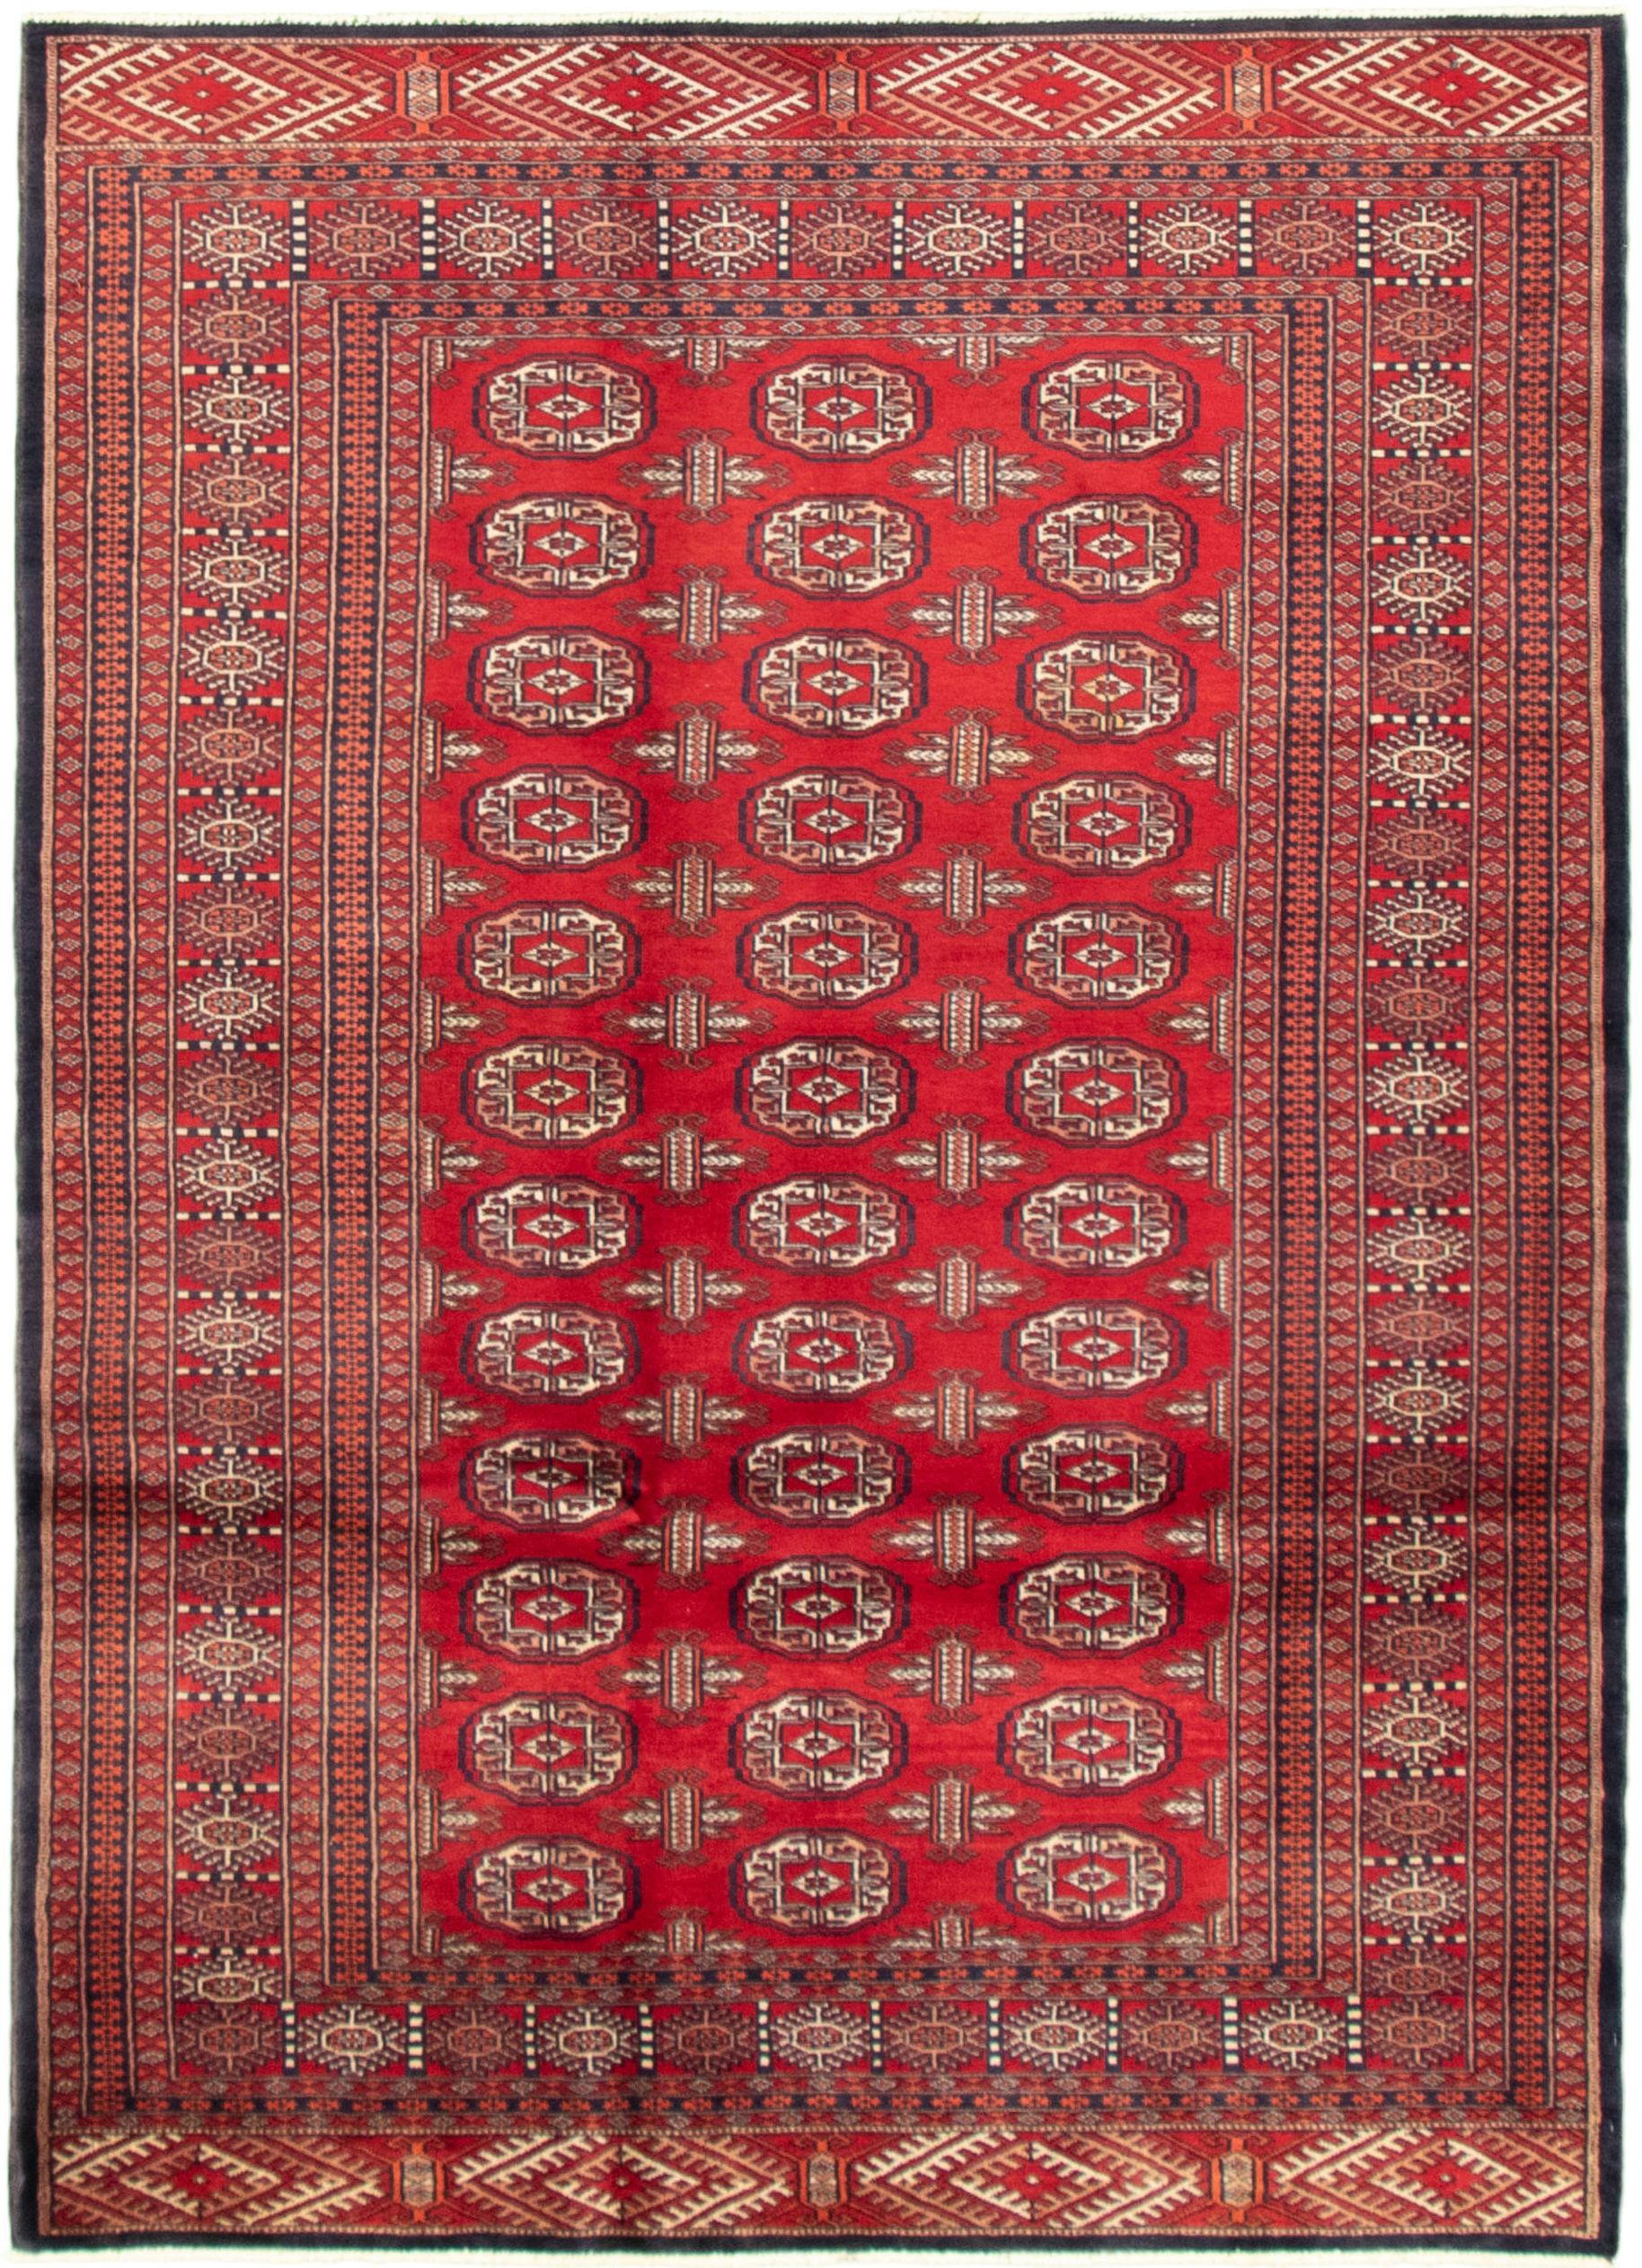 Hand-knotted Peshawar Bokhara Red Wool Rug 4'2" x 5'10"  Size: 4'2" x 5'10"  